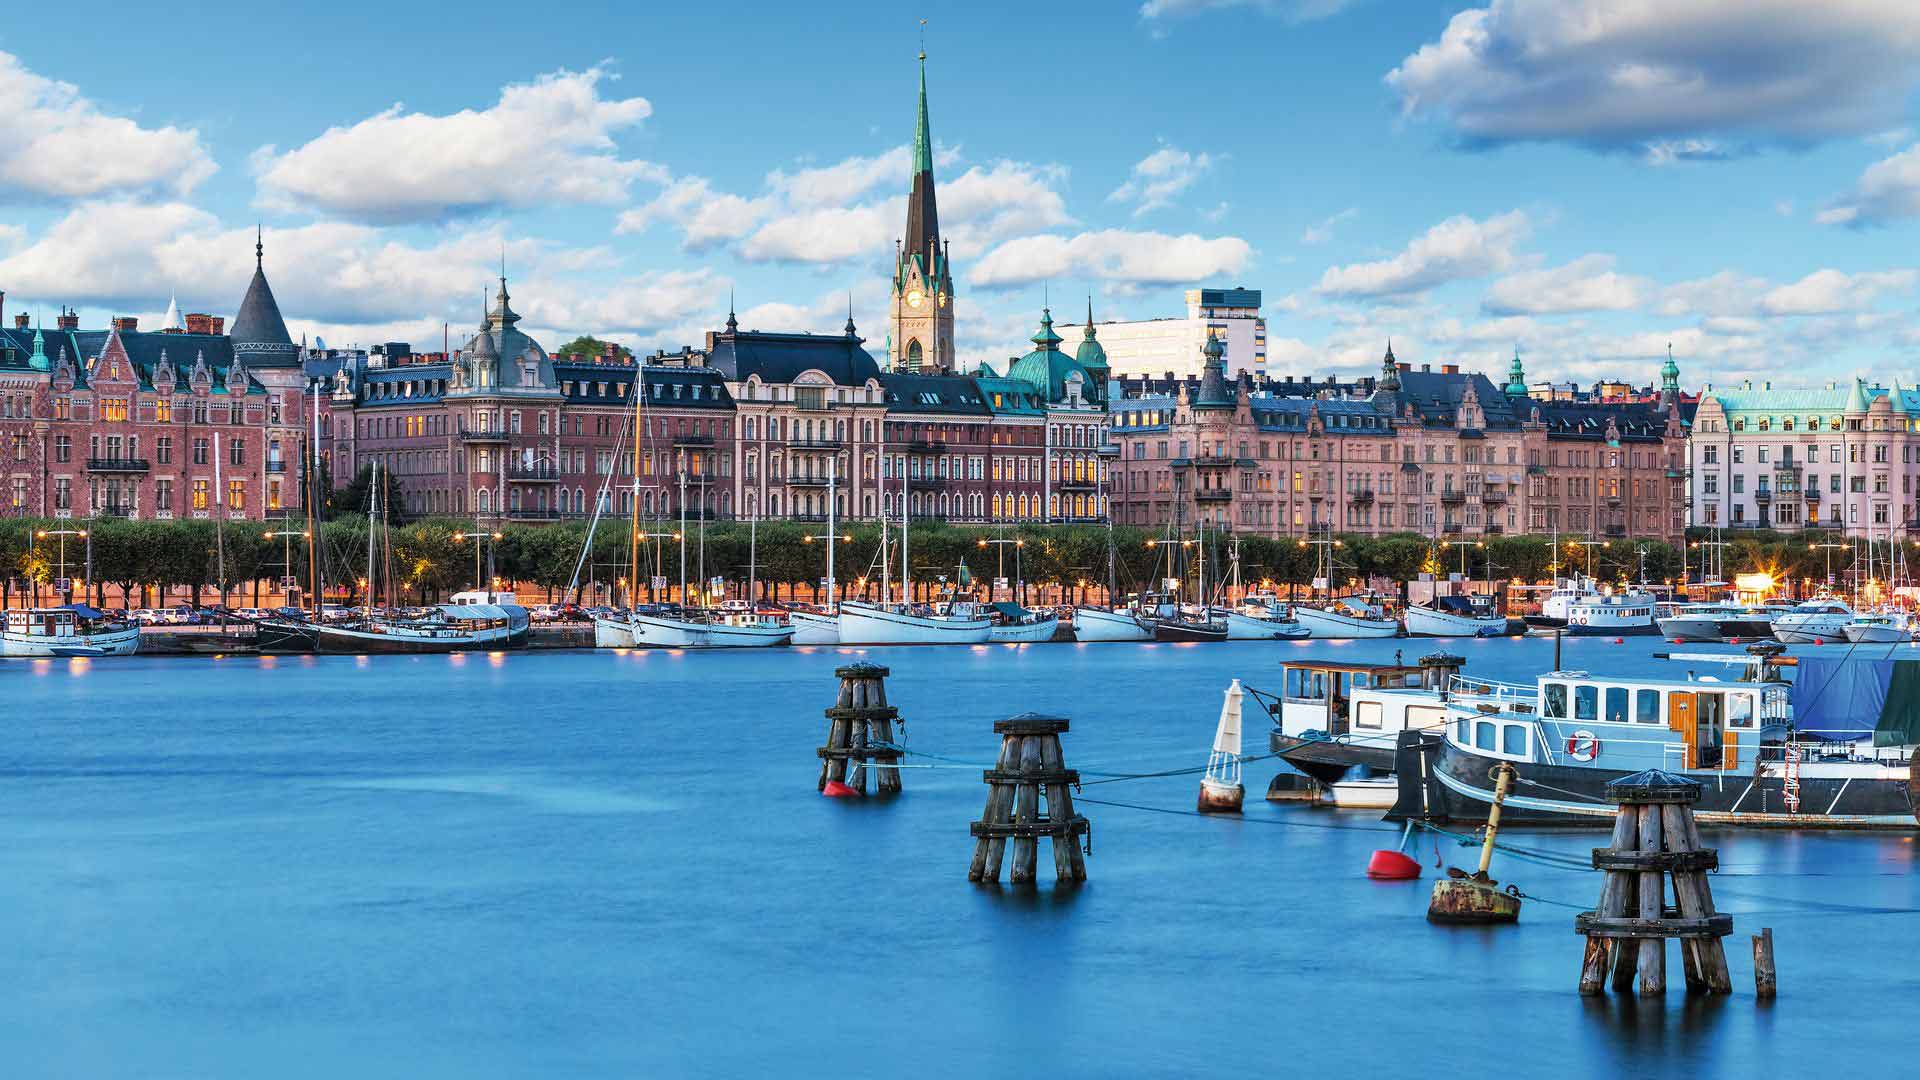 7 Scandinavia Tour Ideas for FirstTime Visitors